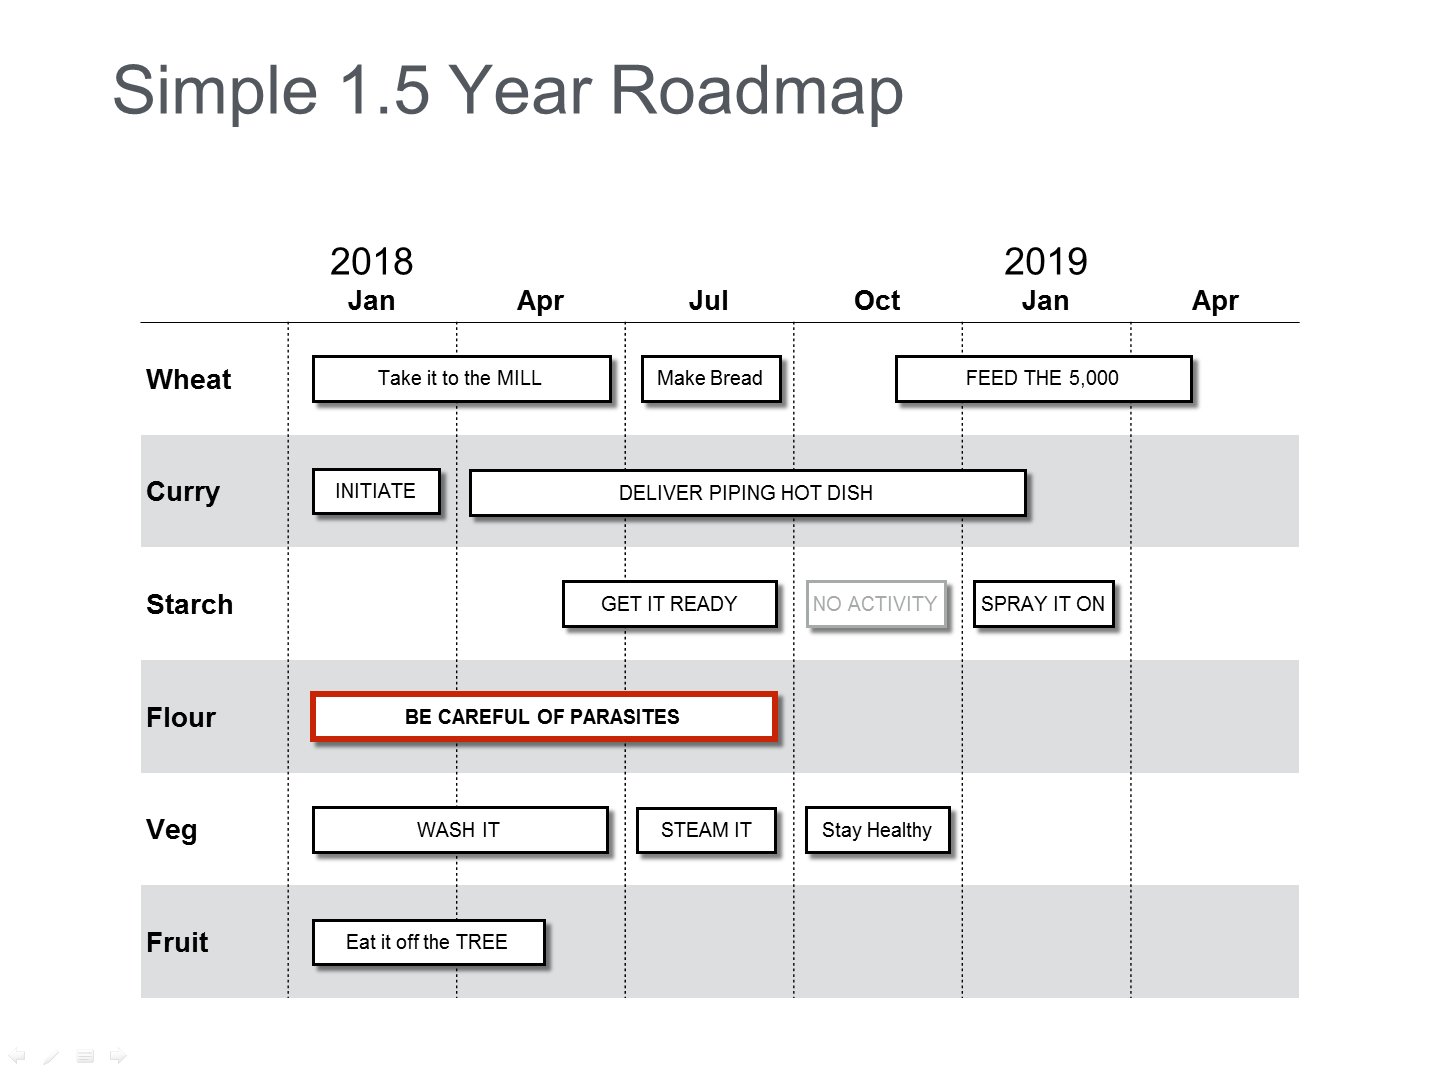 Simple 18 month Product Roadmap